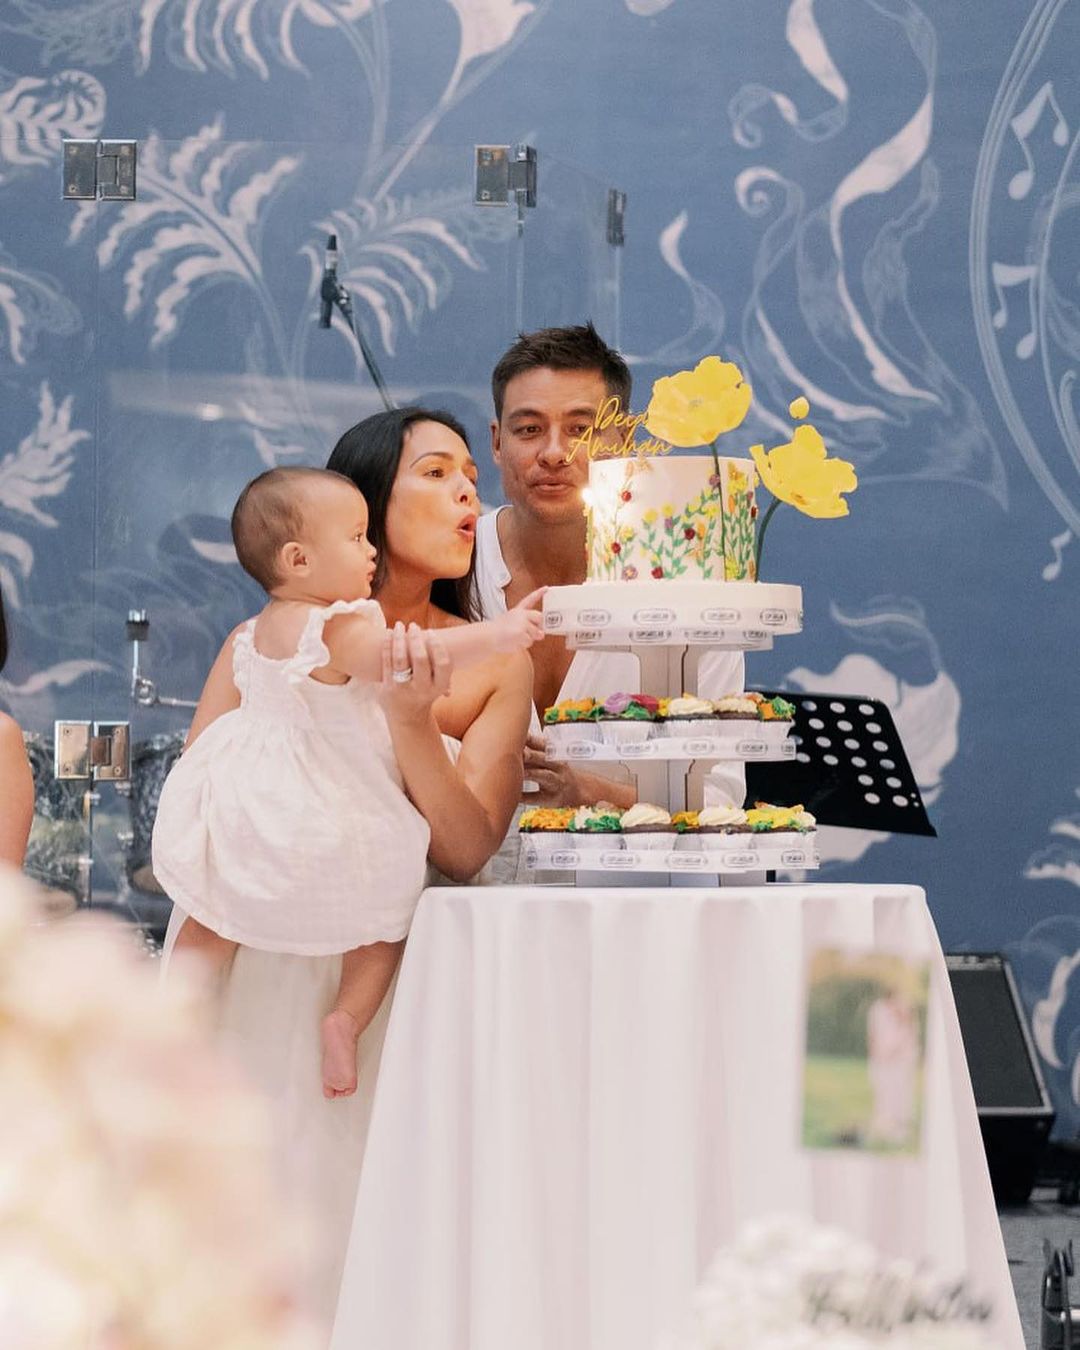 Iza Calzado with Ben Wintle and Deia Amihan blowing out their Christening Cake